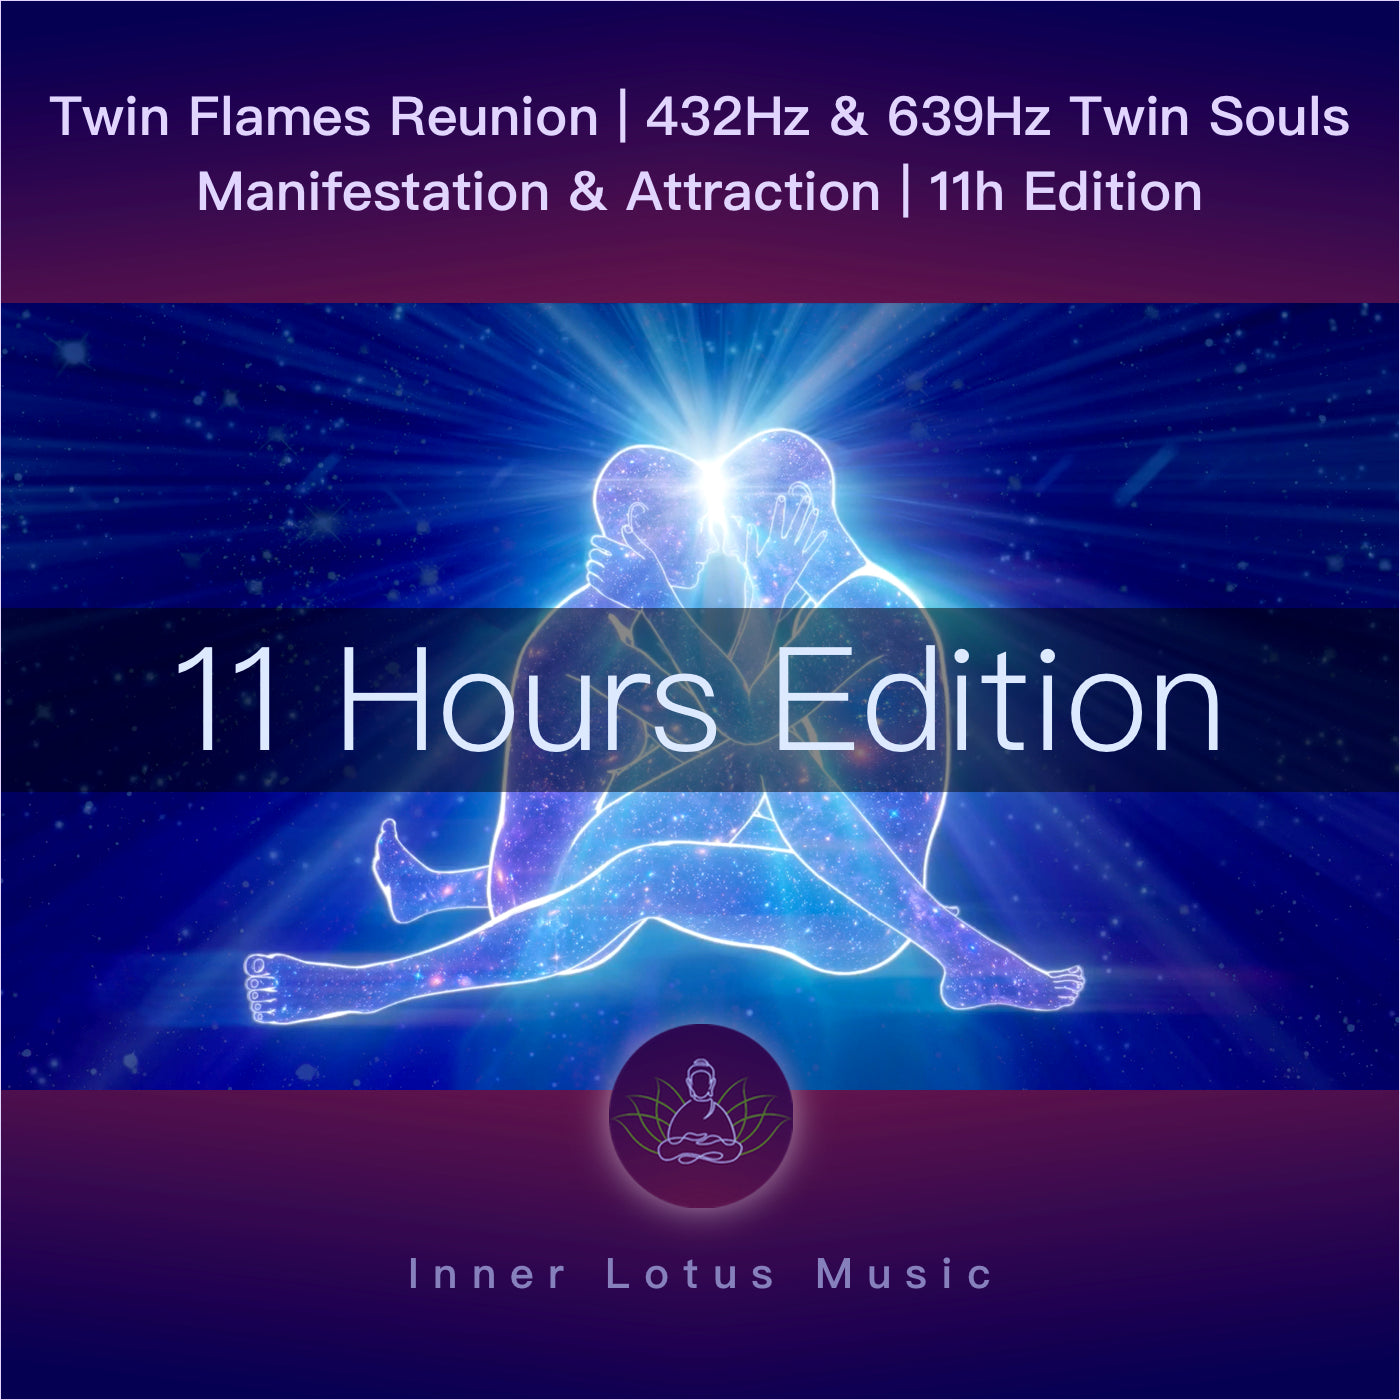 Twin Flames Reunion | 432Hz & 639Hz Twin Souls Manifestation & Attraction | 11h Edition